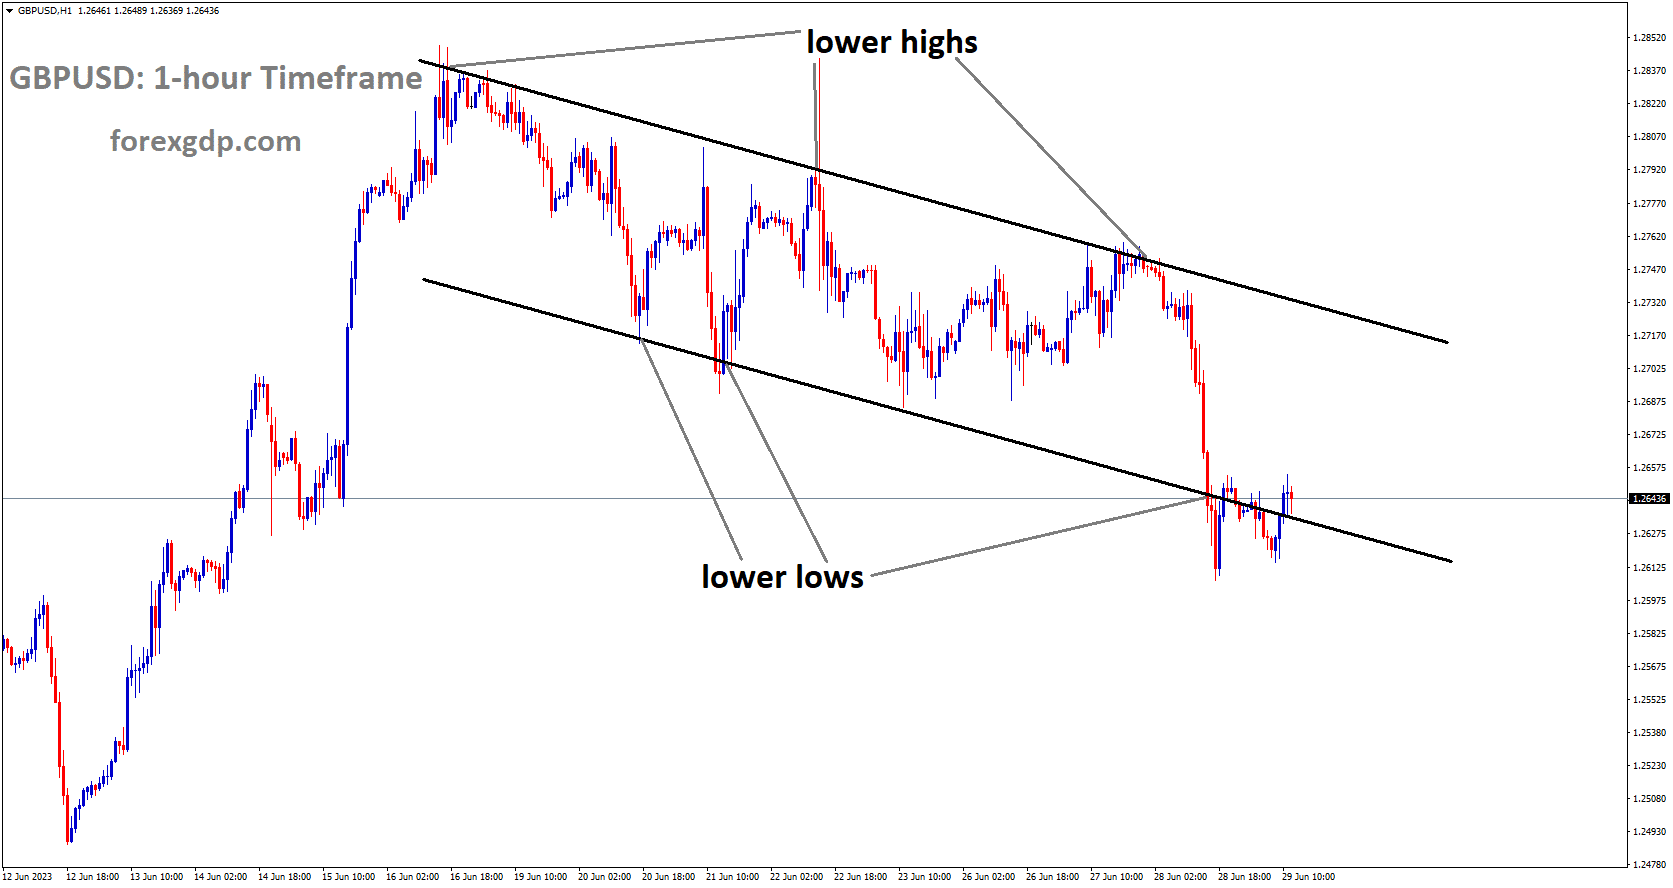 GBPUSD is moving in Descending channel and the market has reached the lower low area of the channel.